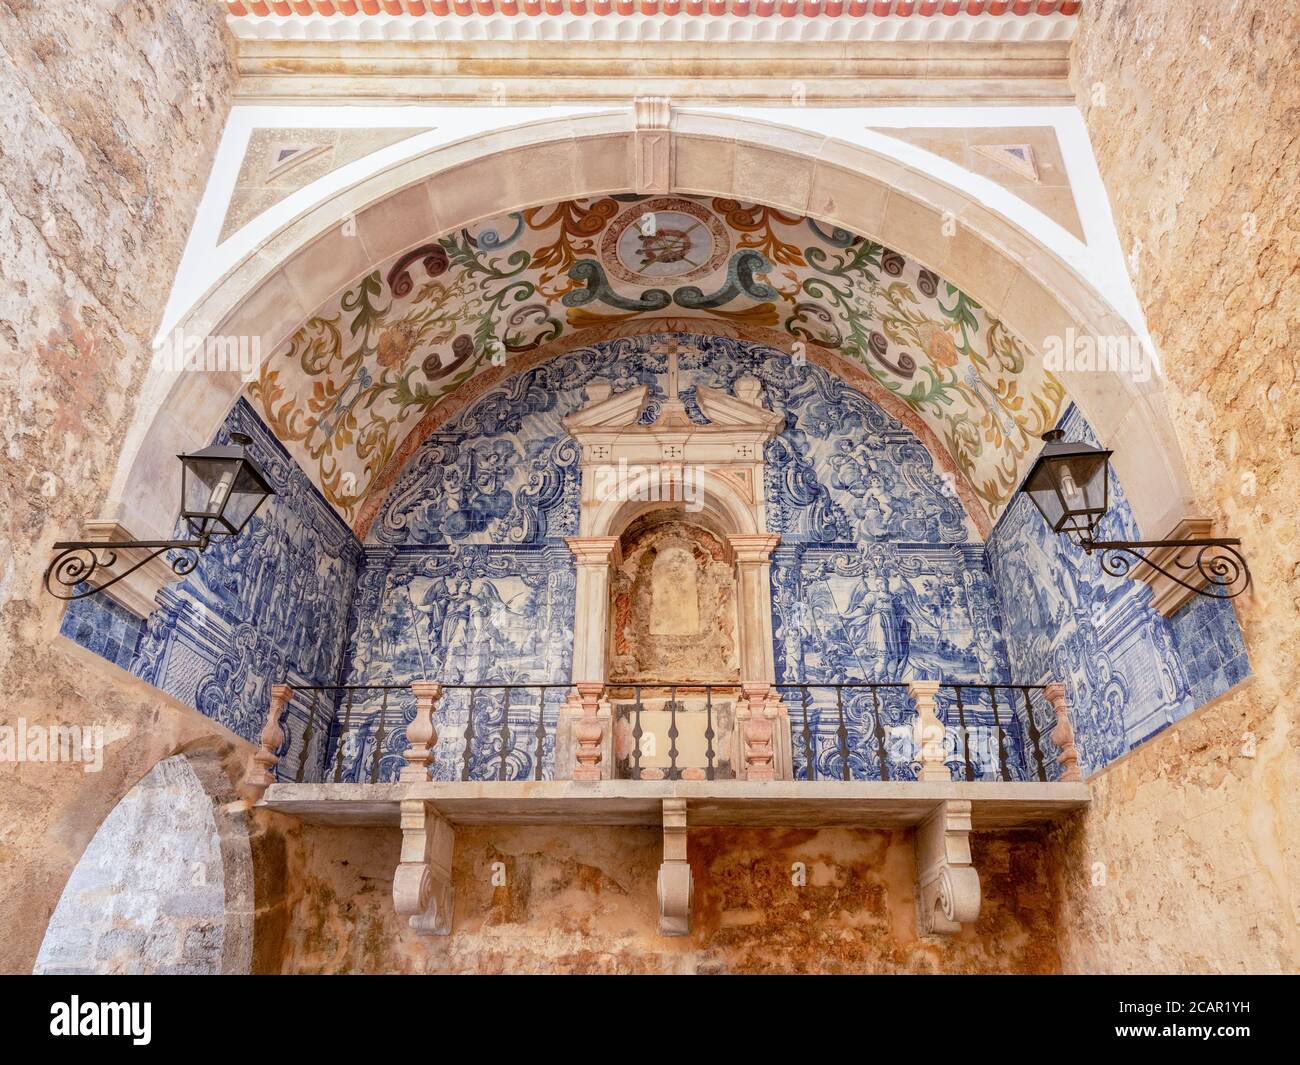 Azulejo tile decoration in the vault of the main gate in the walled town of Obidos, Portugal. Stock Photo